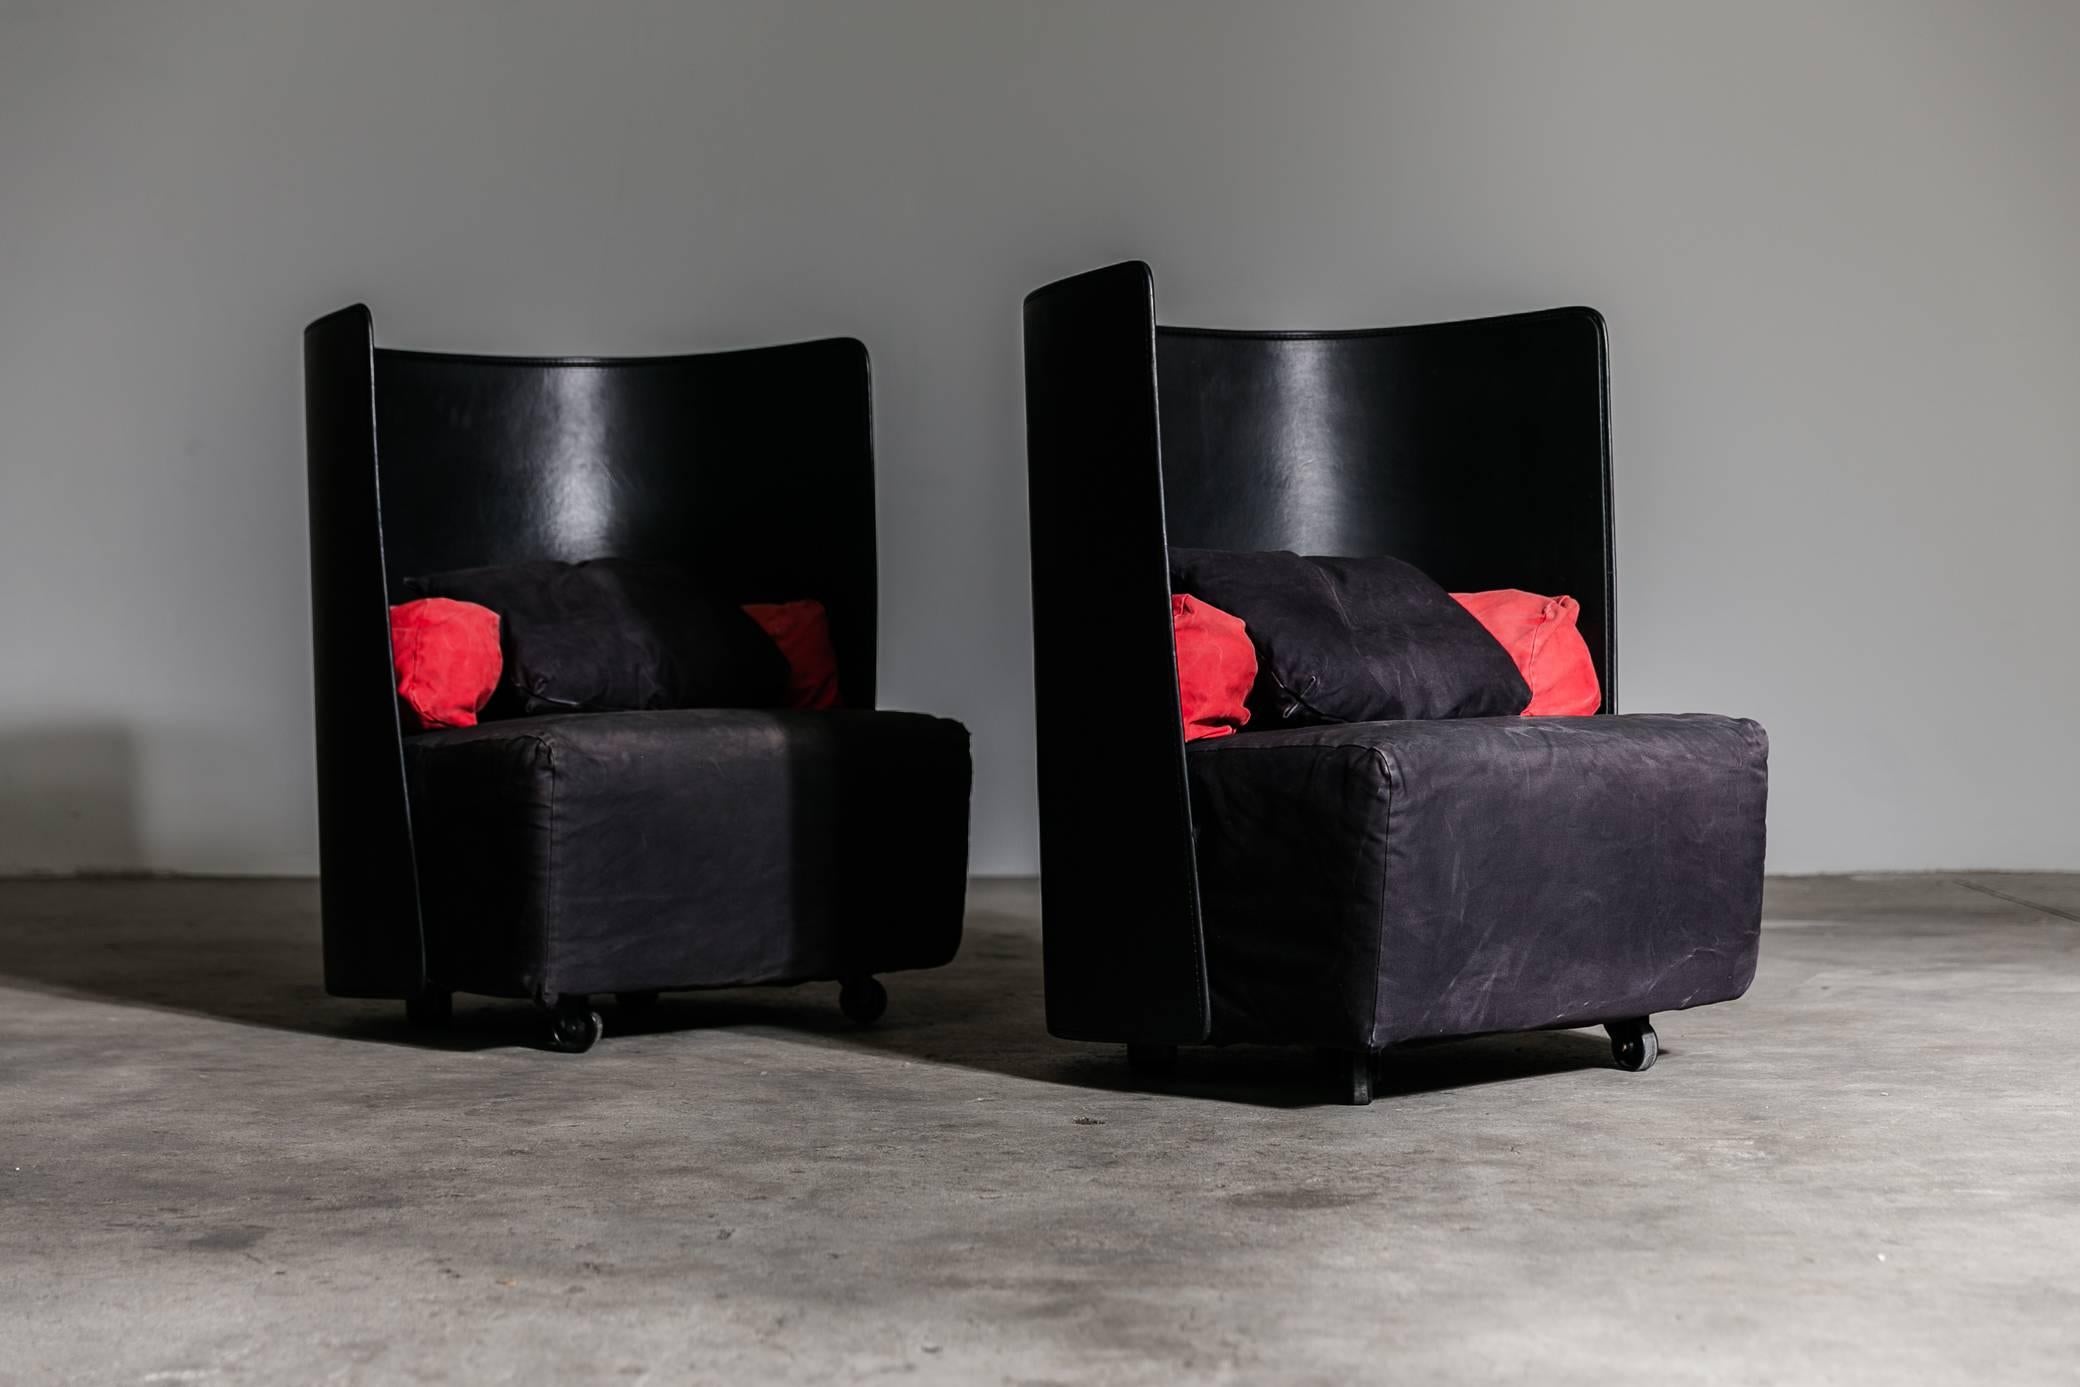 Pair of Campo armchairs by Jonathan de Pas, Donatto D'Urbino and Paolo Lomazzi for Zanotta in 1984, The circular backrest is made of leather, and makes you feel like a cocoon, a circular red cushion helps you to hold the lumbar and a small black